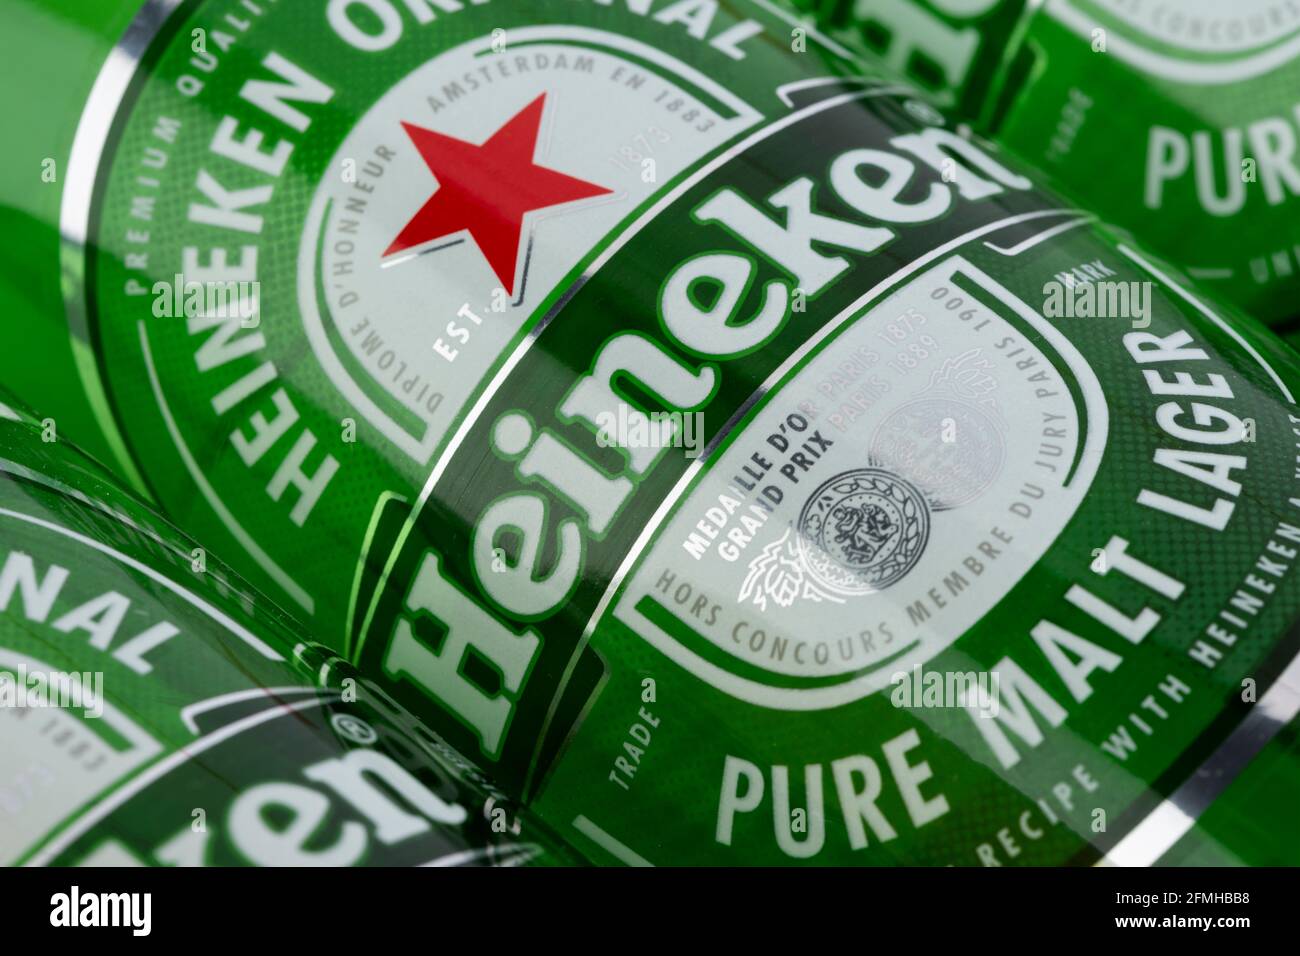 The logo of Dutch beer brand Heineken as seen on a label on one of the company's beer bottles. Stock Photo